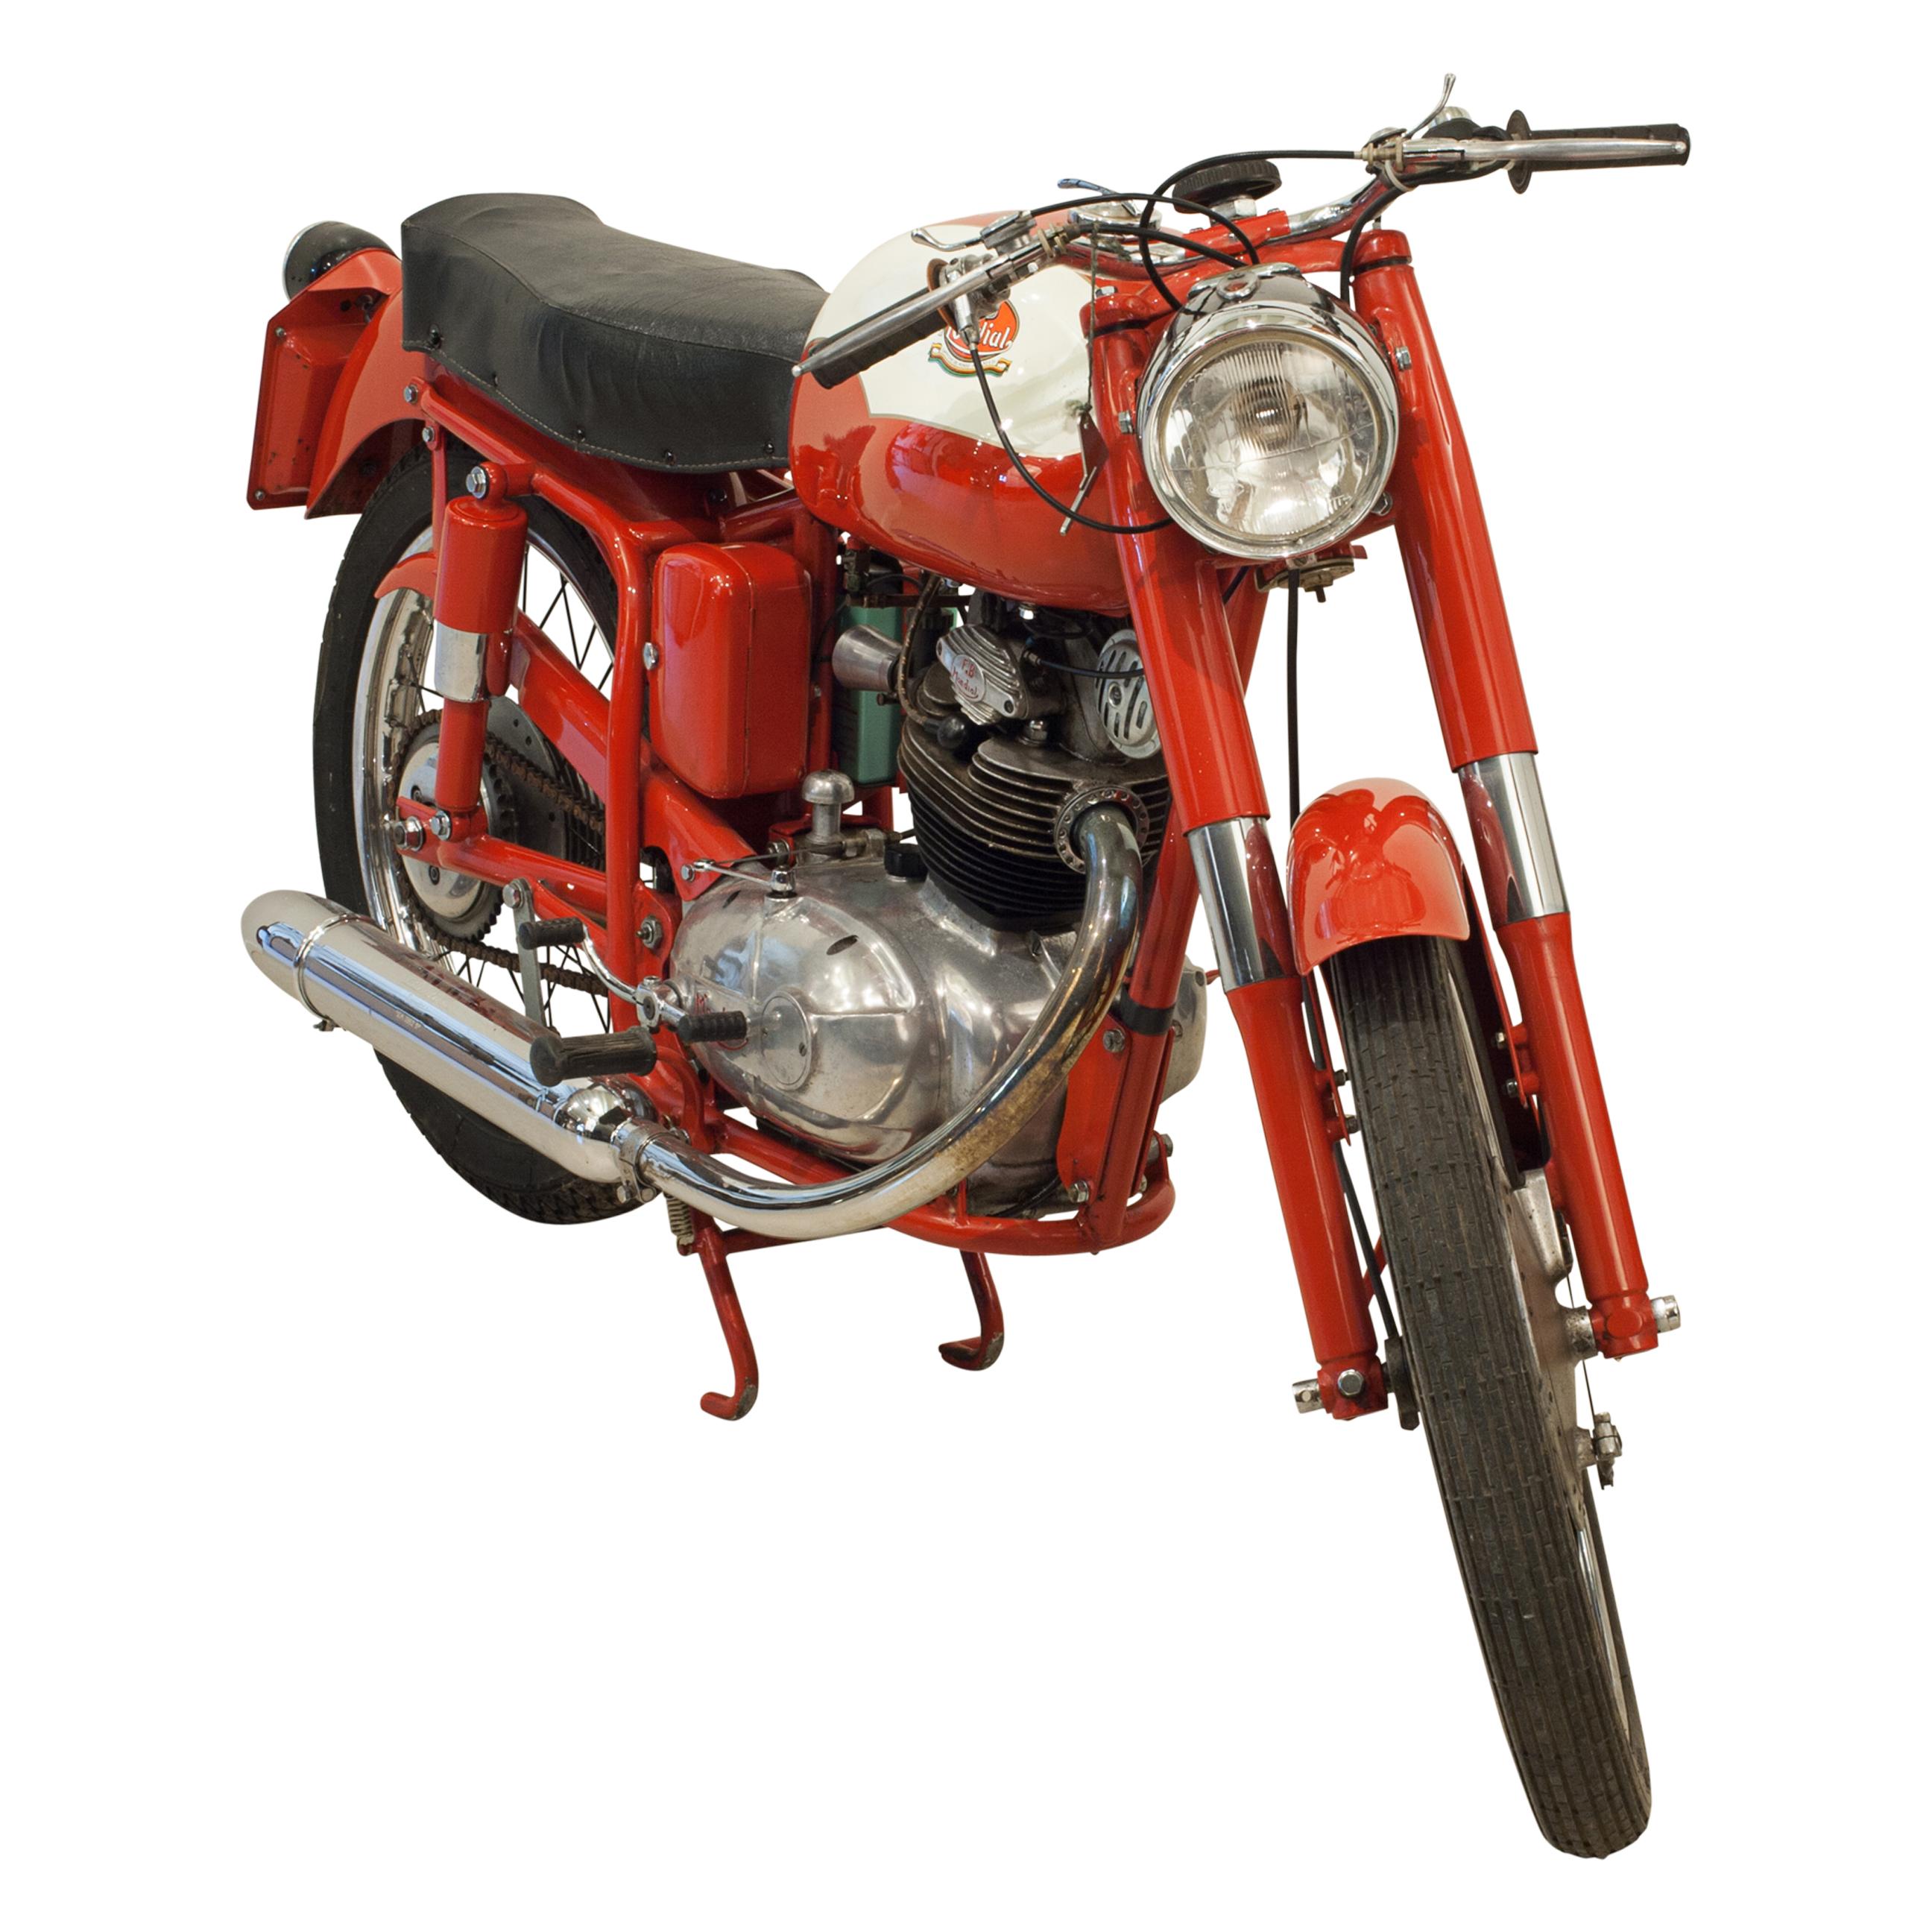 F B (Fratelli Boselli) Mondial 1960 Mondial Sprint Motorcycle.
This exquisitely engineered and beautifully constructed 1960 Mondial Sprint motorbike is unmistakably Italian. It has matching frame and engine No. 02277, Reg No. BSJ 784, 175cc overhead